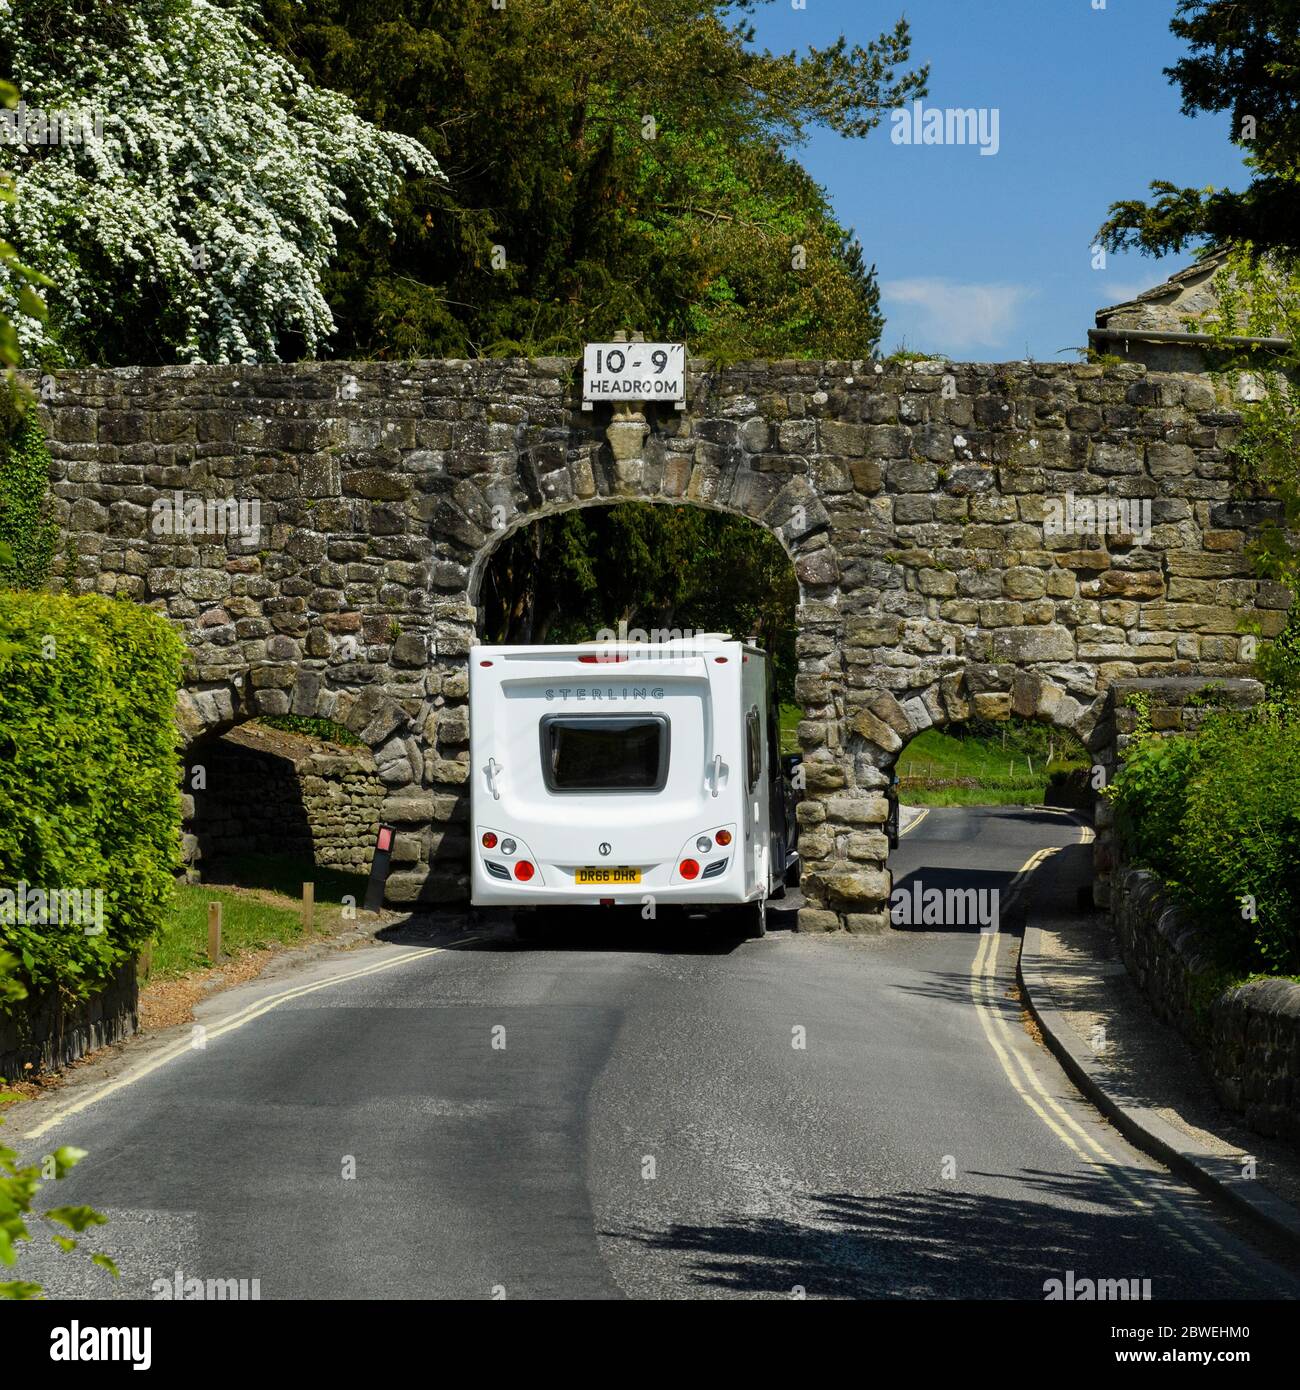 Caravan passing through narrow rustic stone archway spanning scenic country lane (tight squeeze) - B6160, Bolton Abbey village, Yorkshire, England, UK Stock Photo